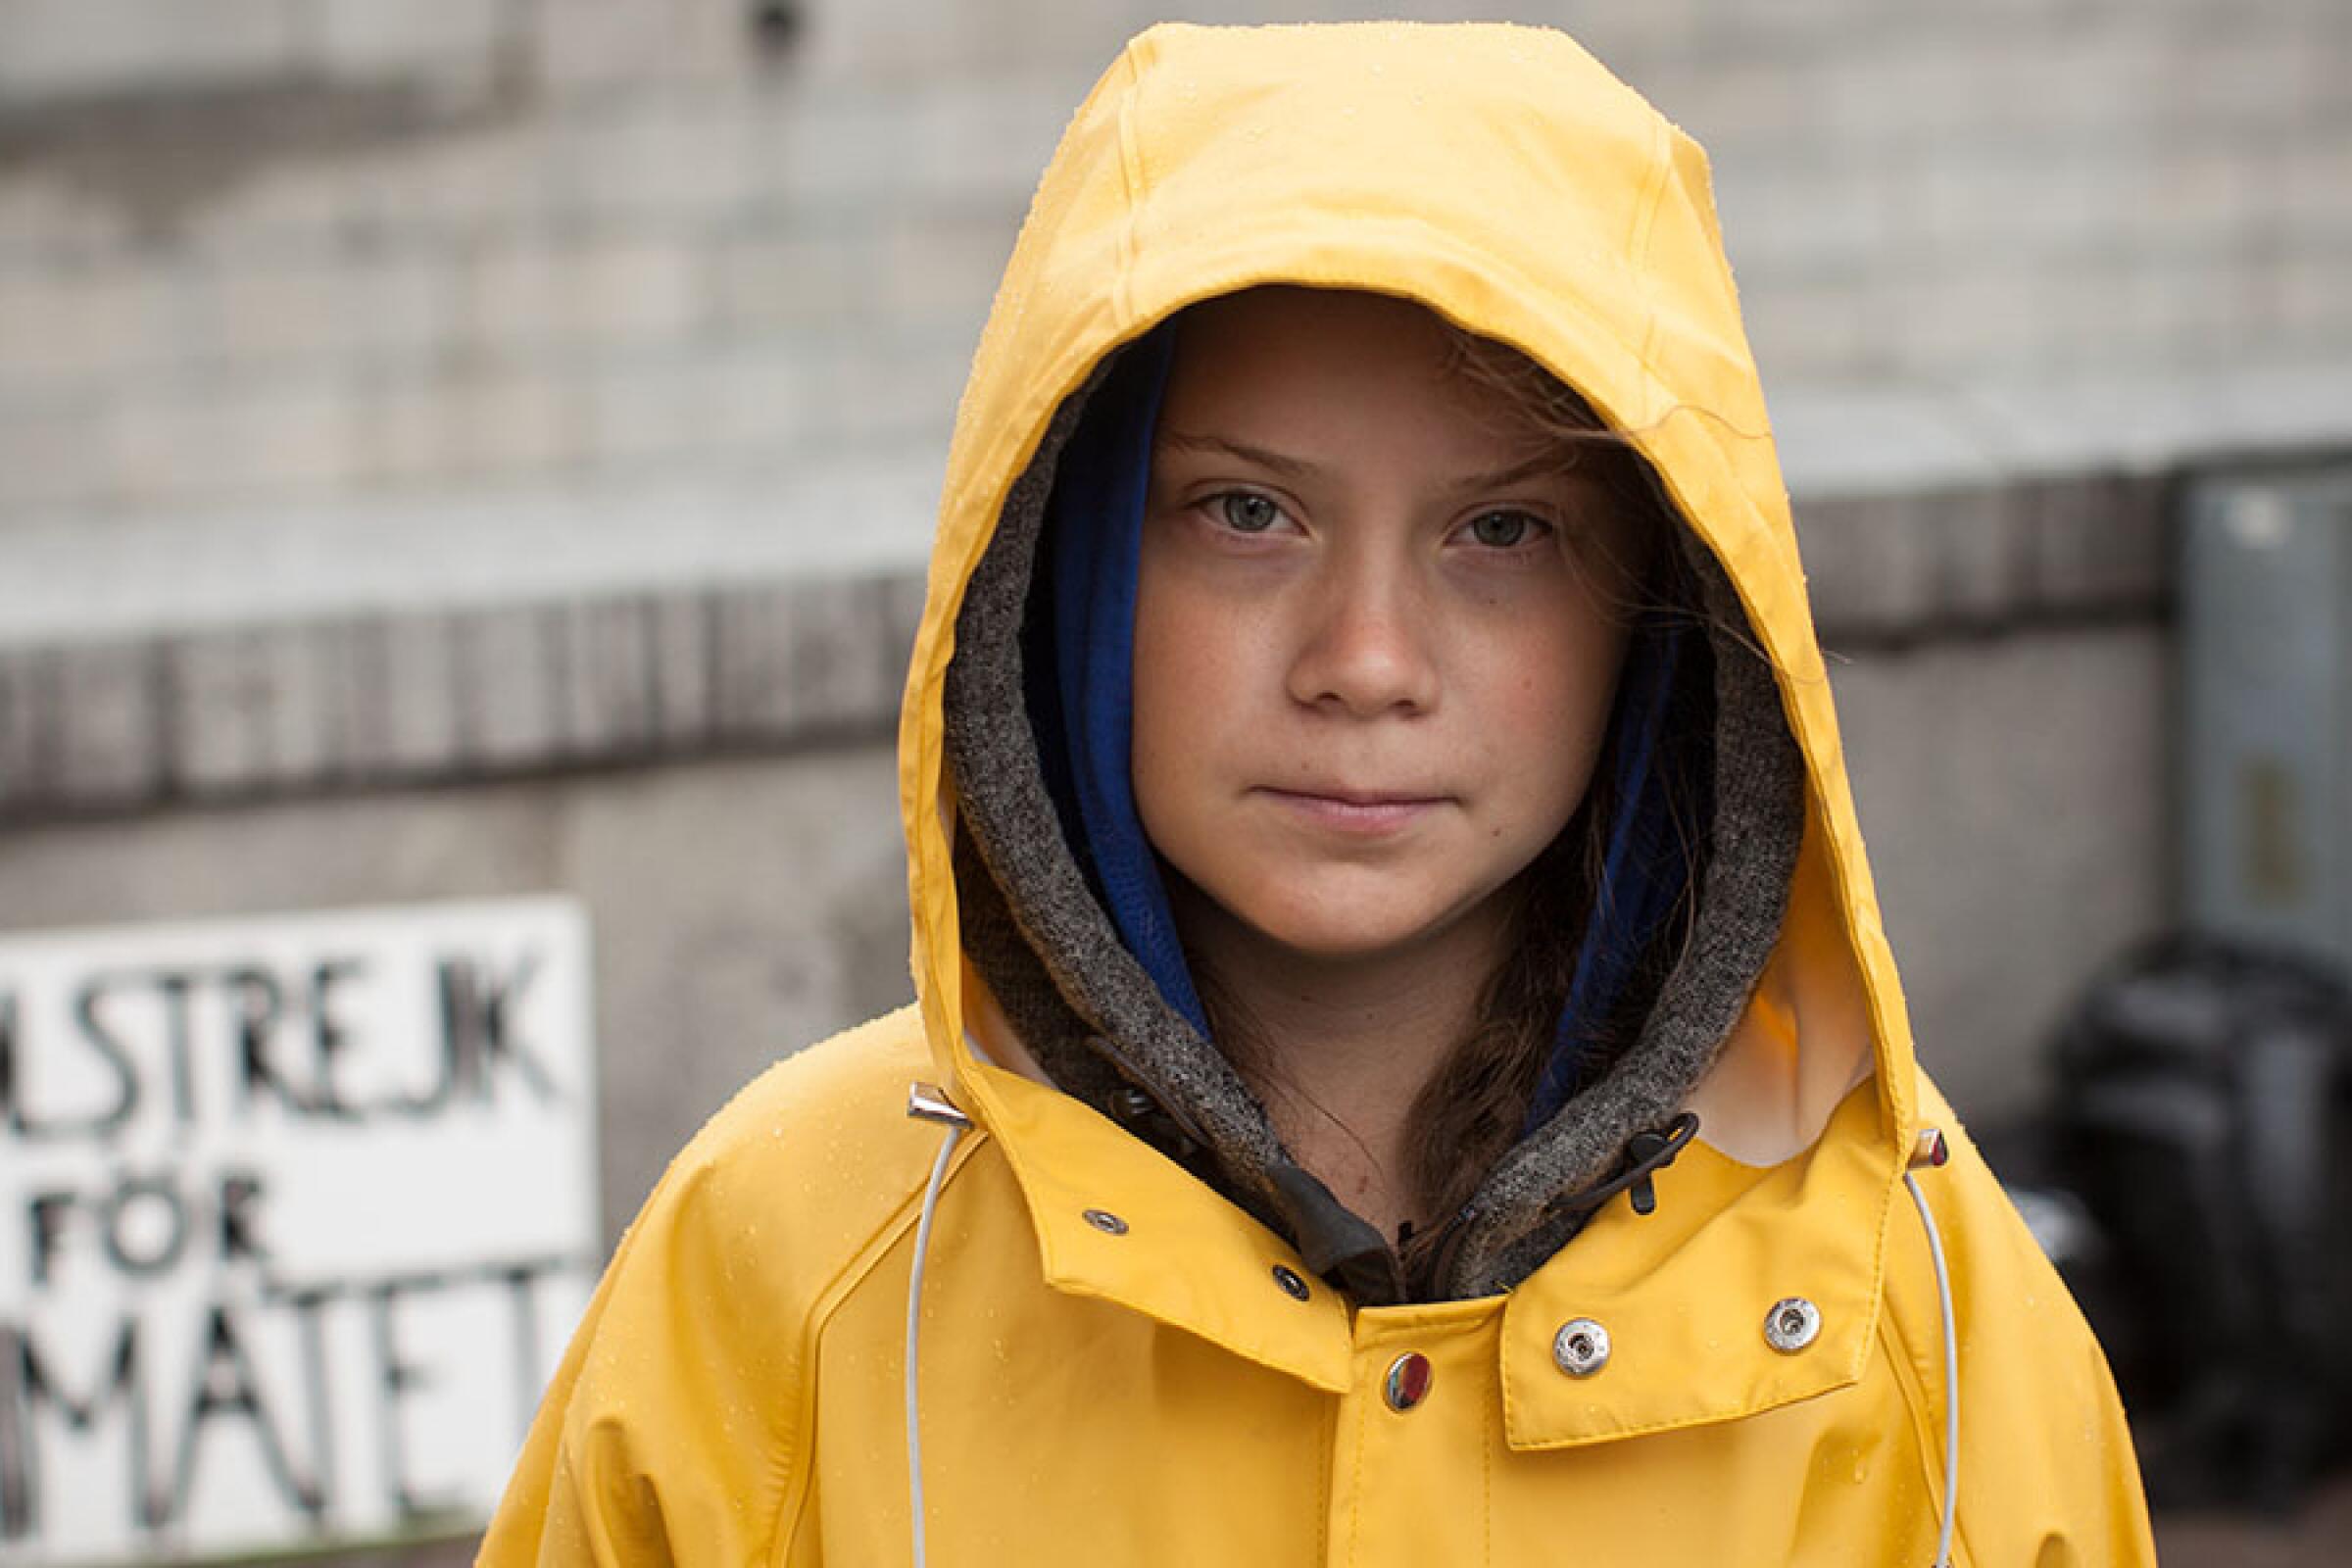 Greta Thunberg in "I Am Greta," one of several films by or about women that stood out from the pack.